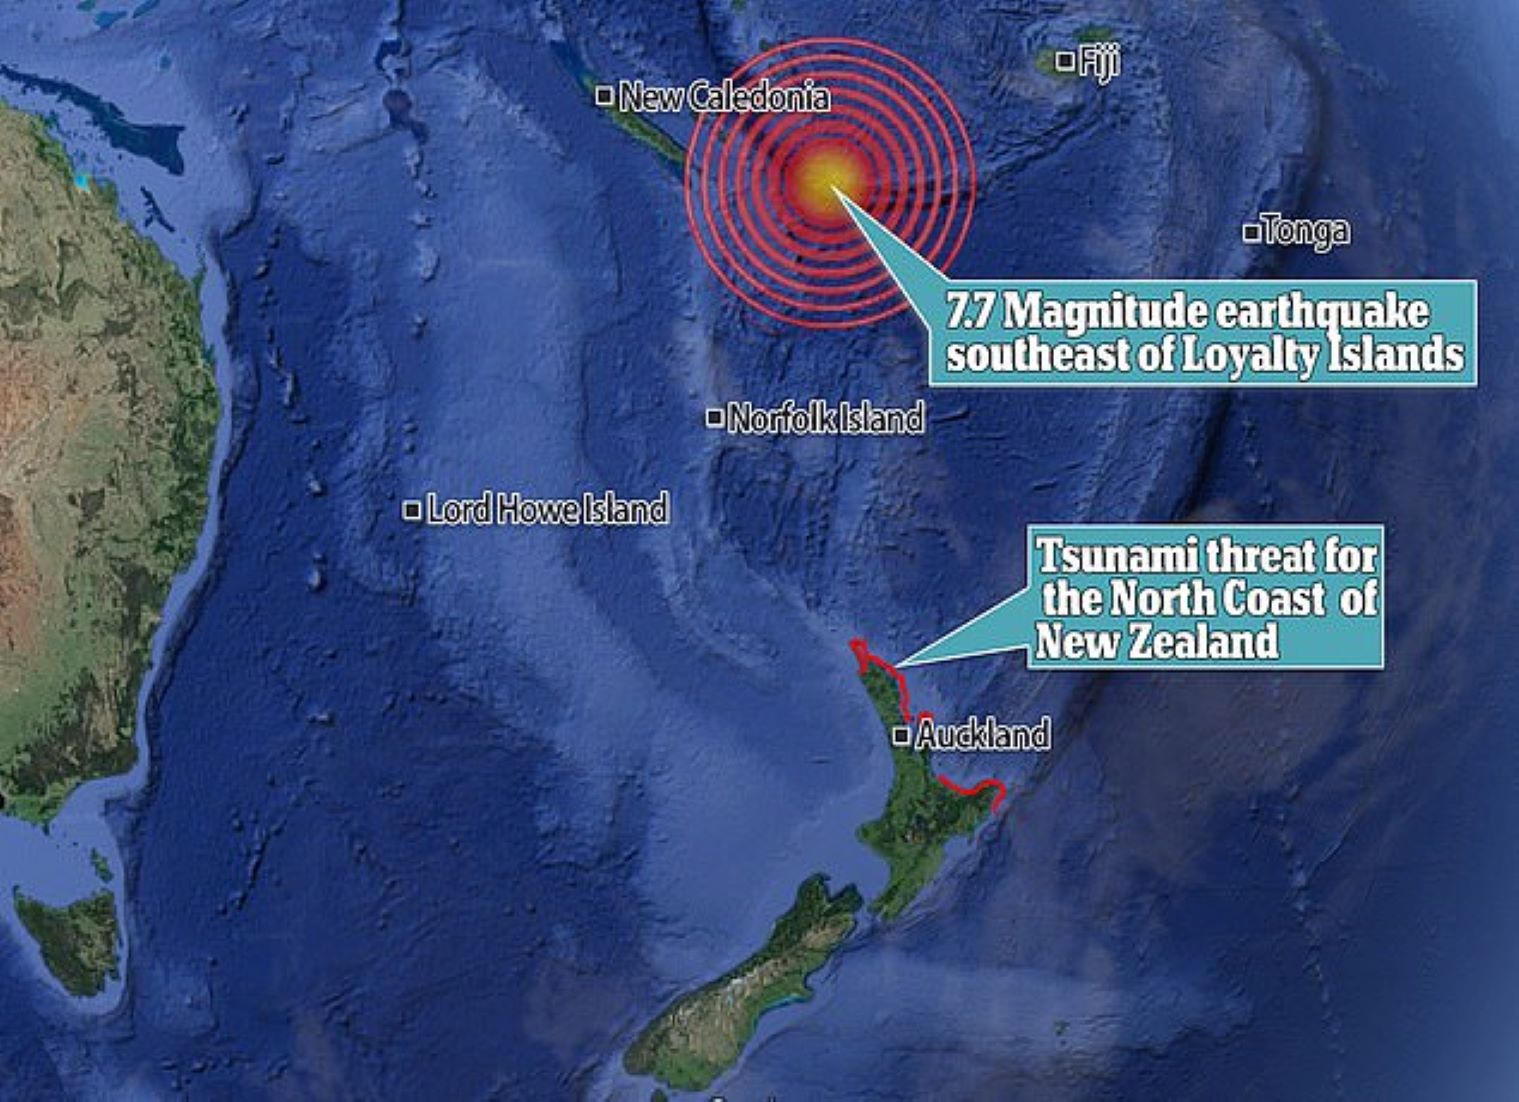 7.7-Magnitude Quake Hit Southeast Of The Loyalty Islands – USGS